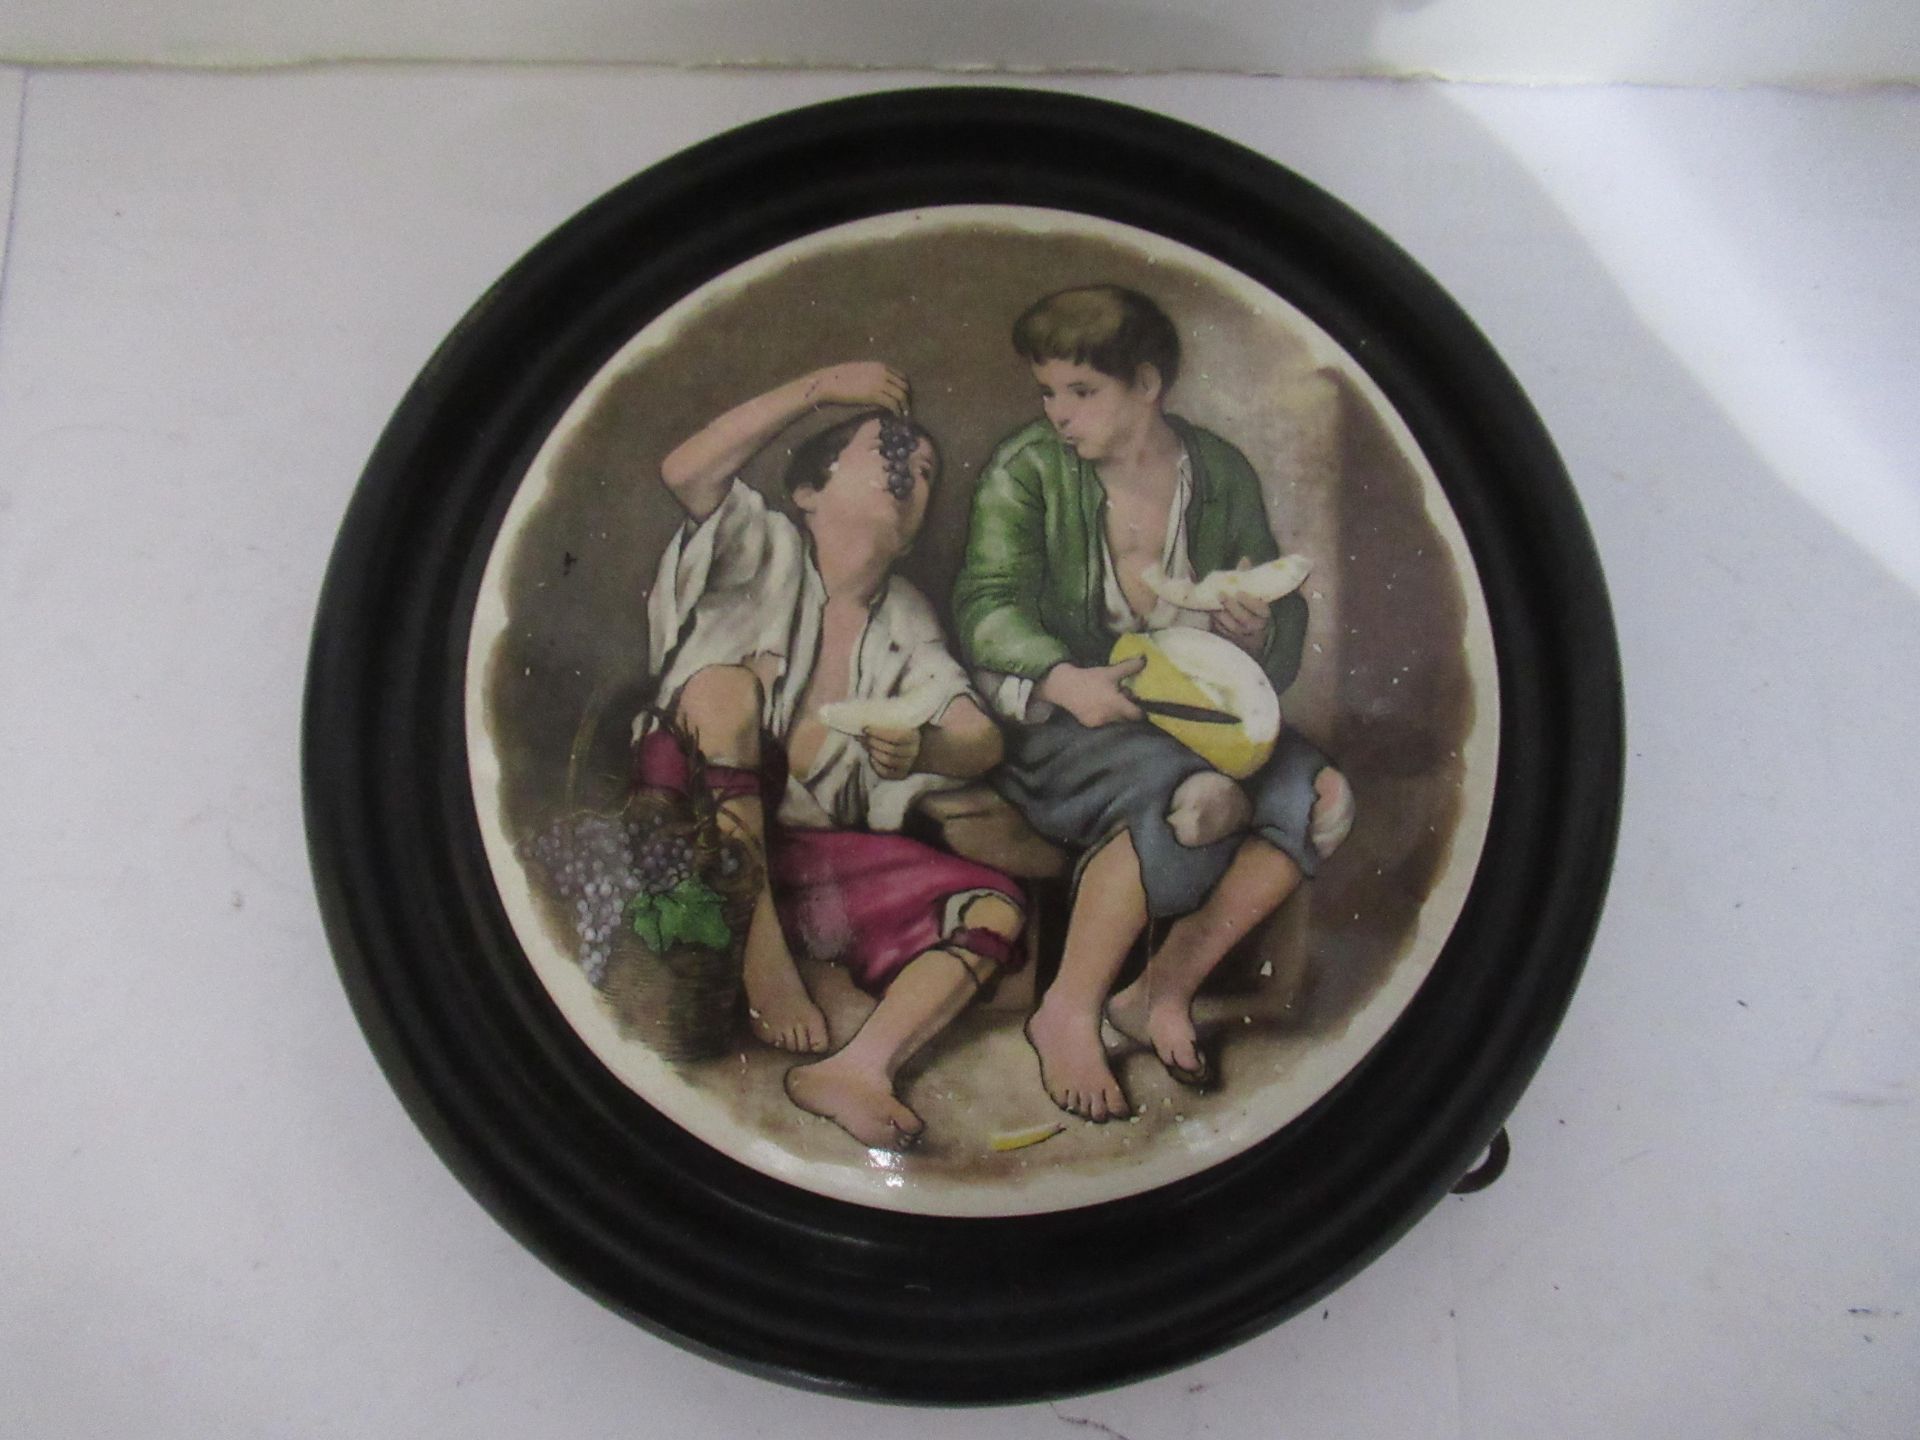 6x Prattware ceramic lids in wooden mounts including 'Pegwell Bay', 'Rifle Contest Wimbledon 1868', - Image 10 of 16